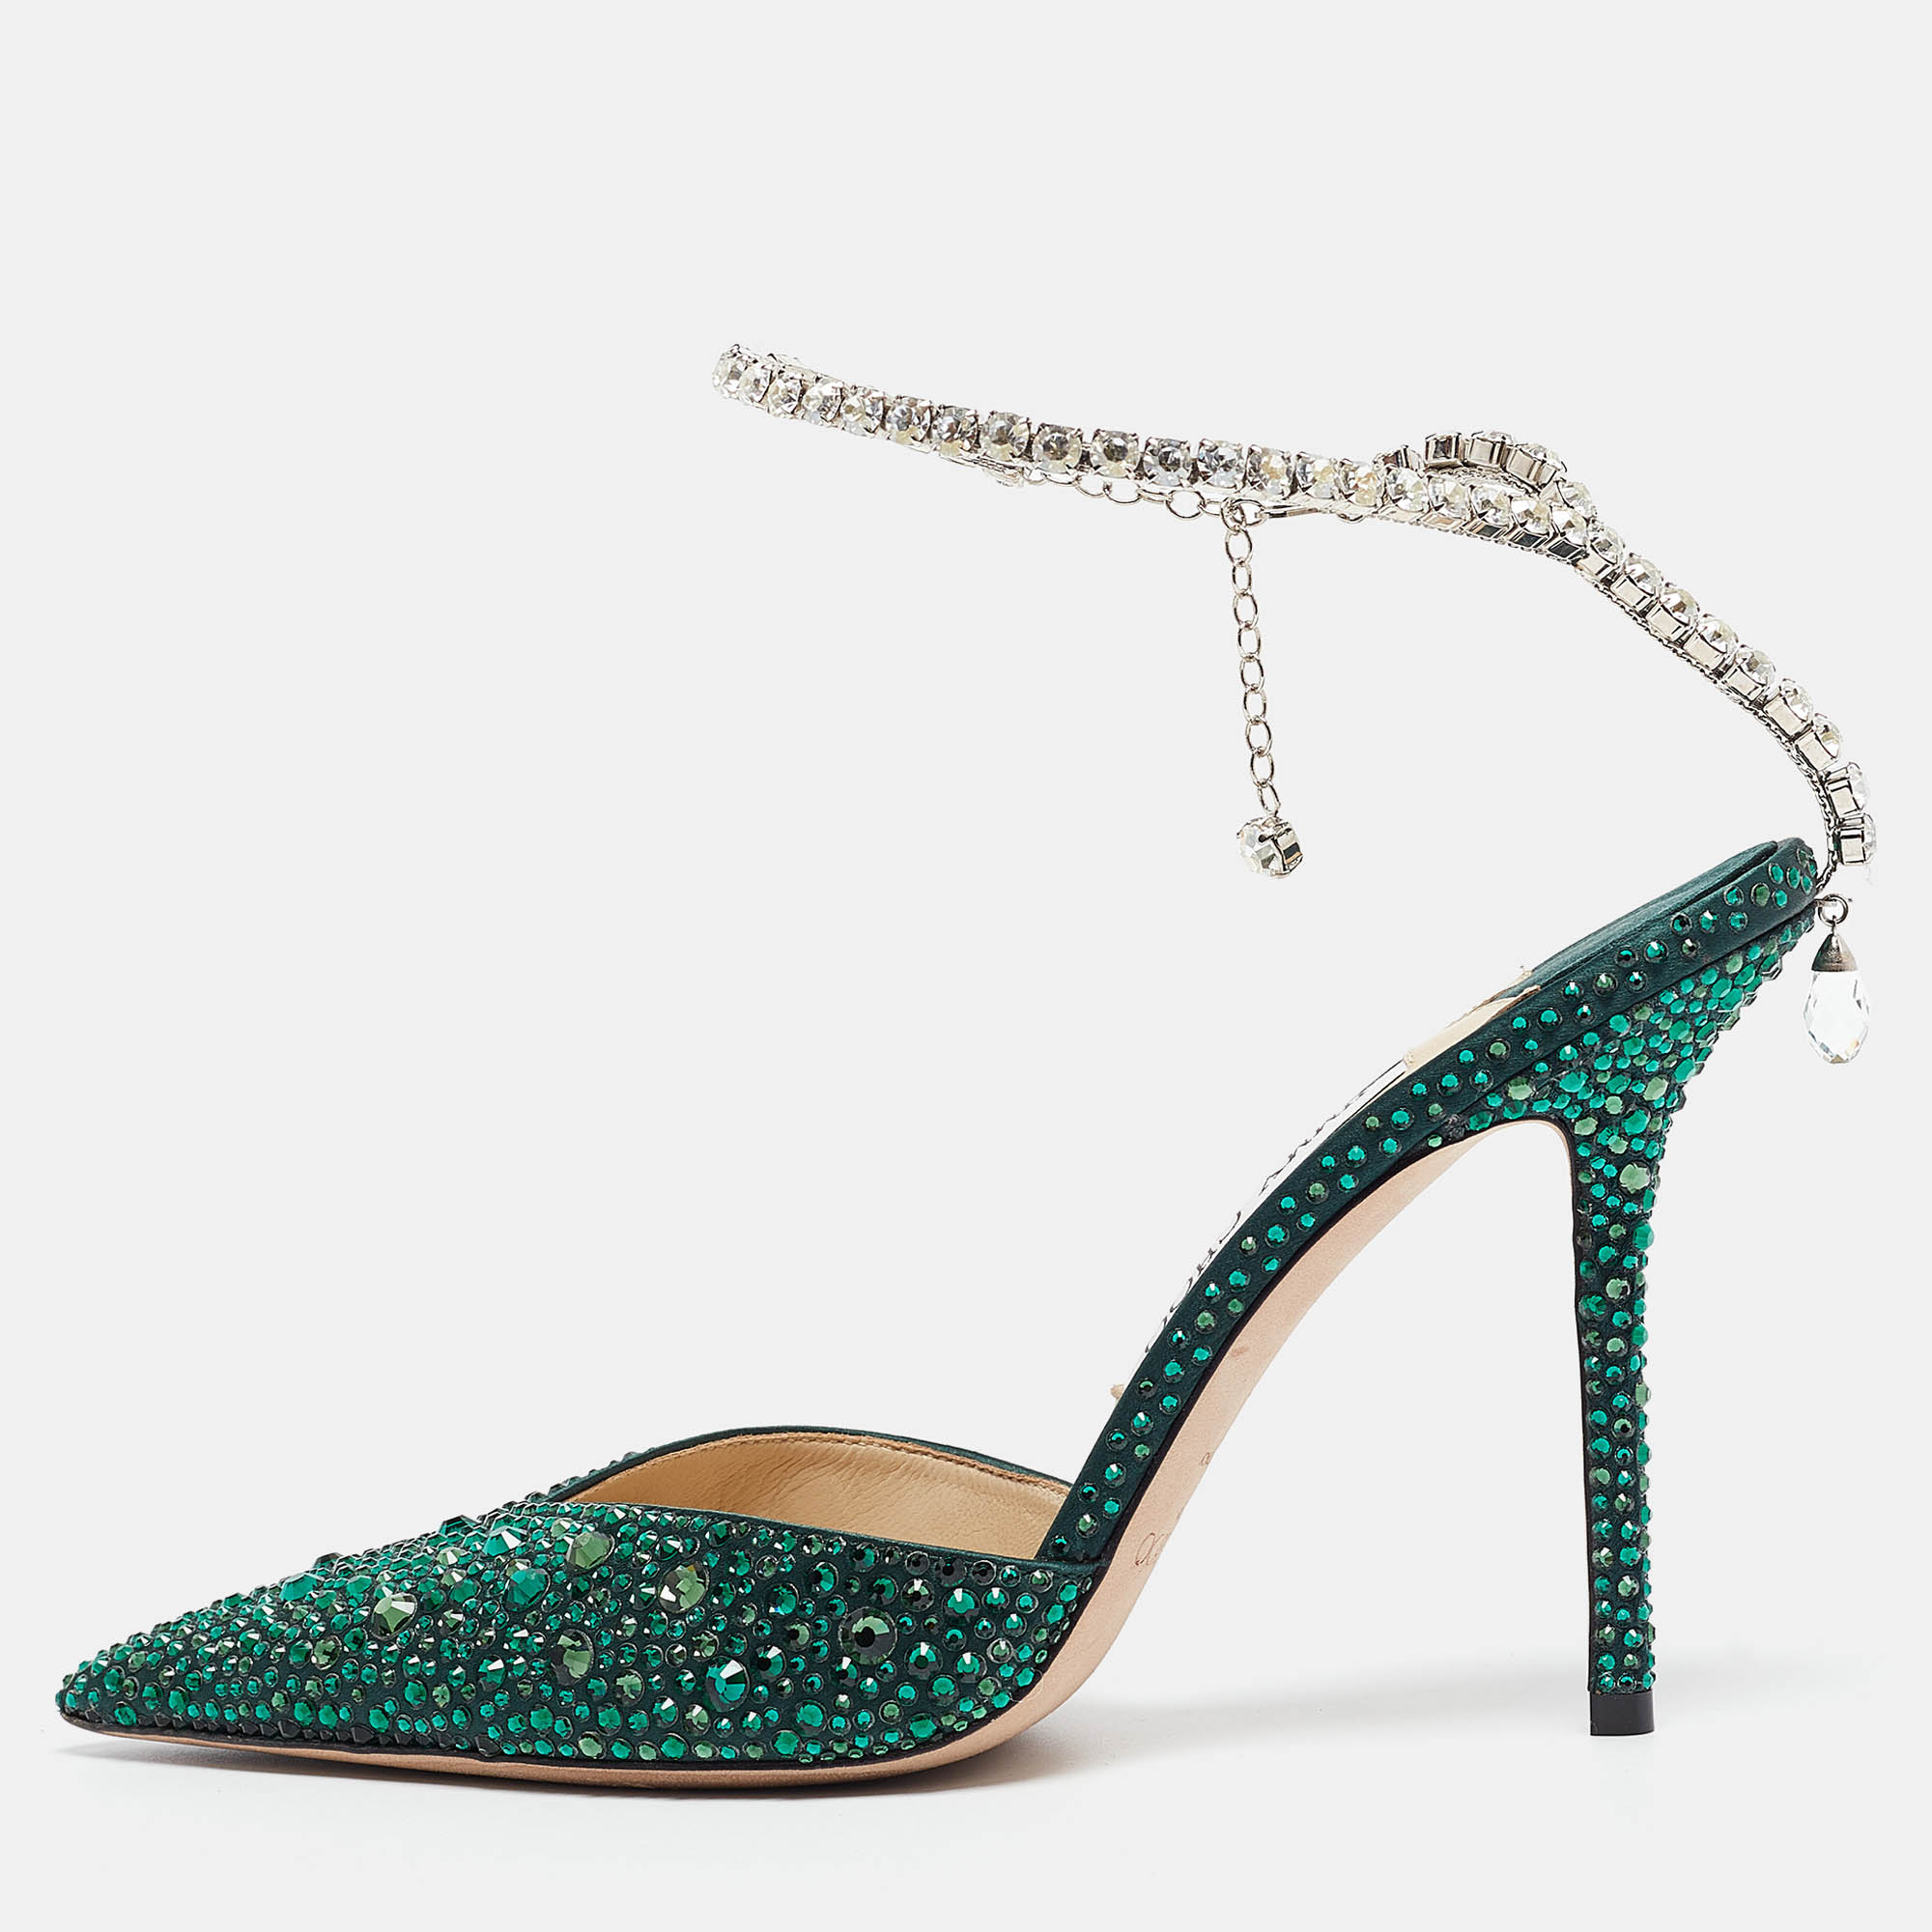 The crystal embellished ankle strap of this pair of Jimmy Choo pumps will elegantly hug your feet. Created from satin it is sculpted to form a pointed toe silhouette in an attractive green shade. The 11.5cm heels of these shoes will add grace to your every step.